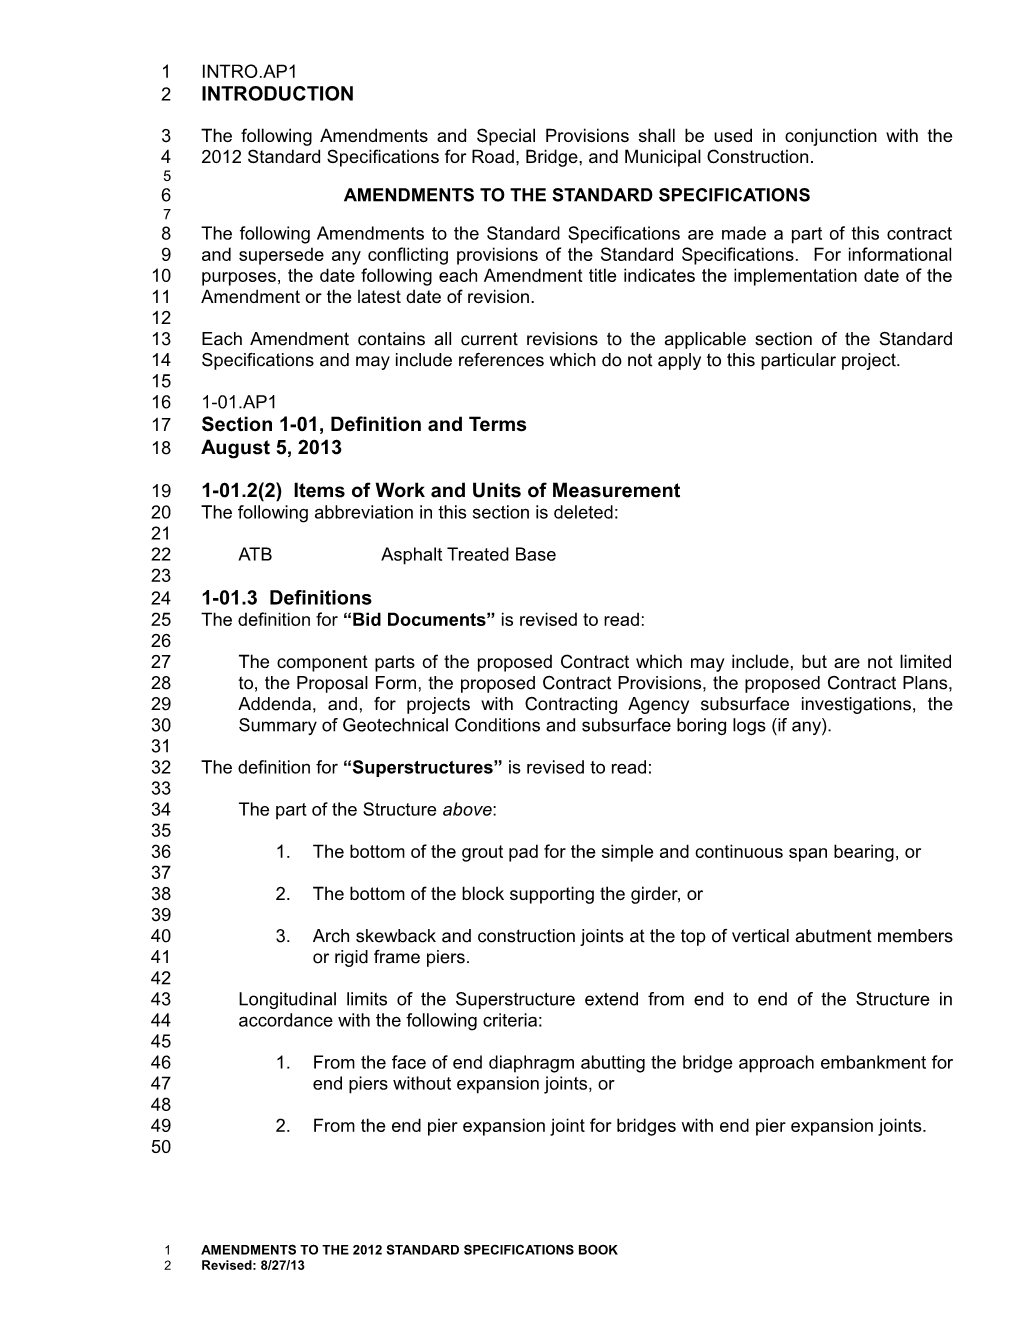 Amendments to the Standard Specifications